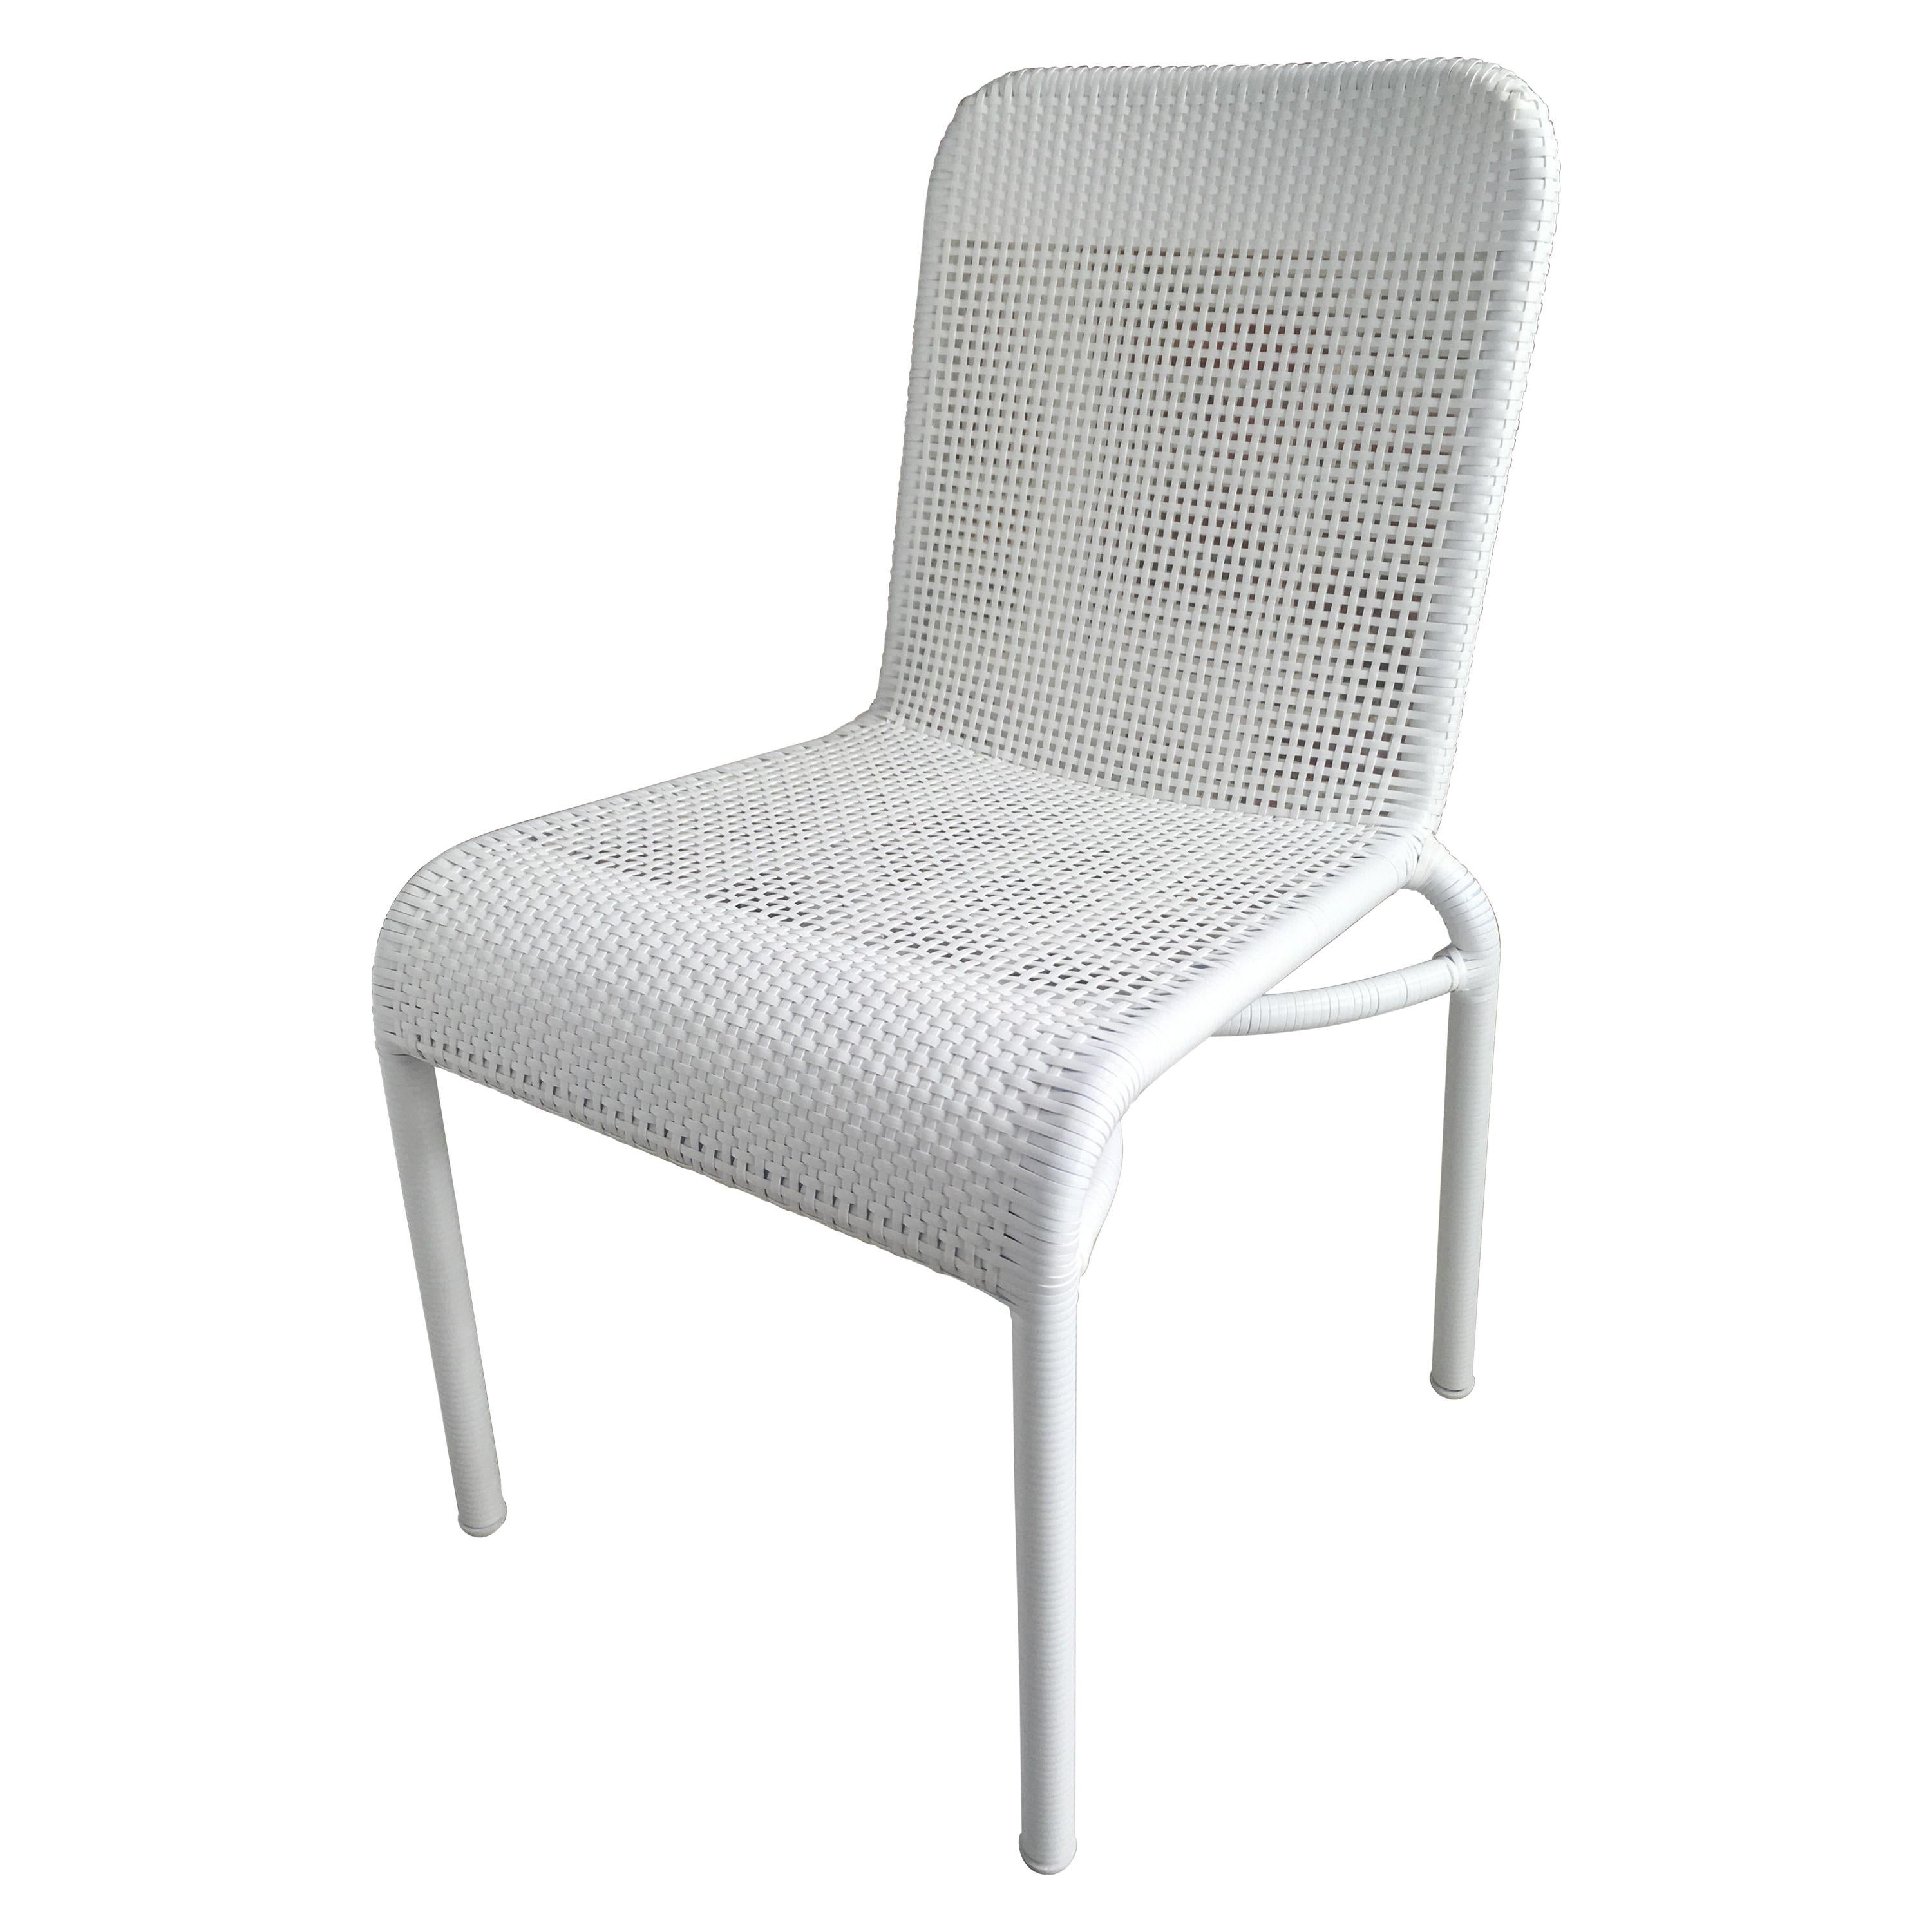 French Modern Design White Braided Resin Outdoor Chair